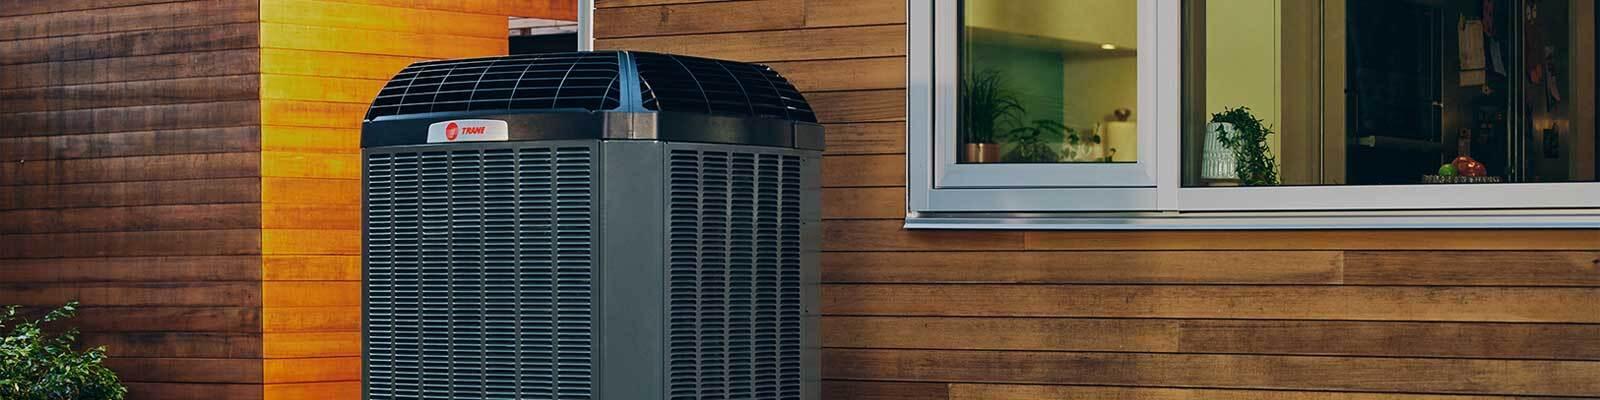 Demystifying Heat Pumps: What Is a Heat Pump System?